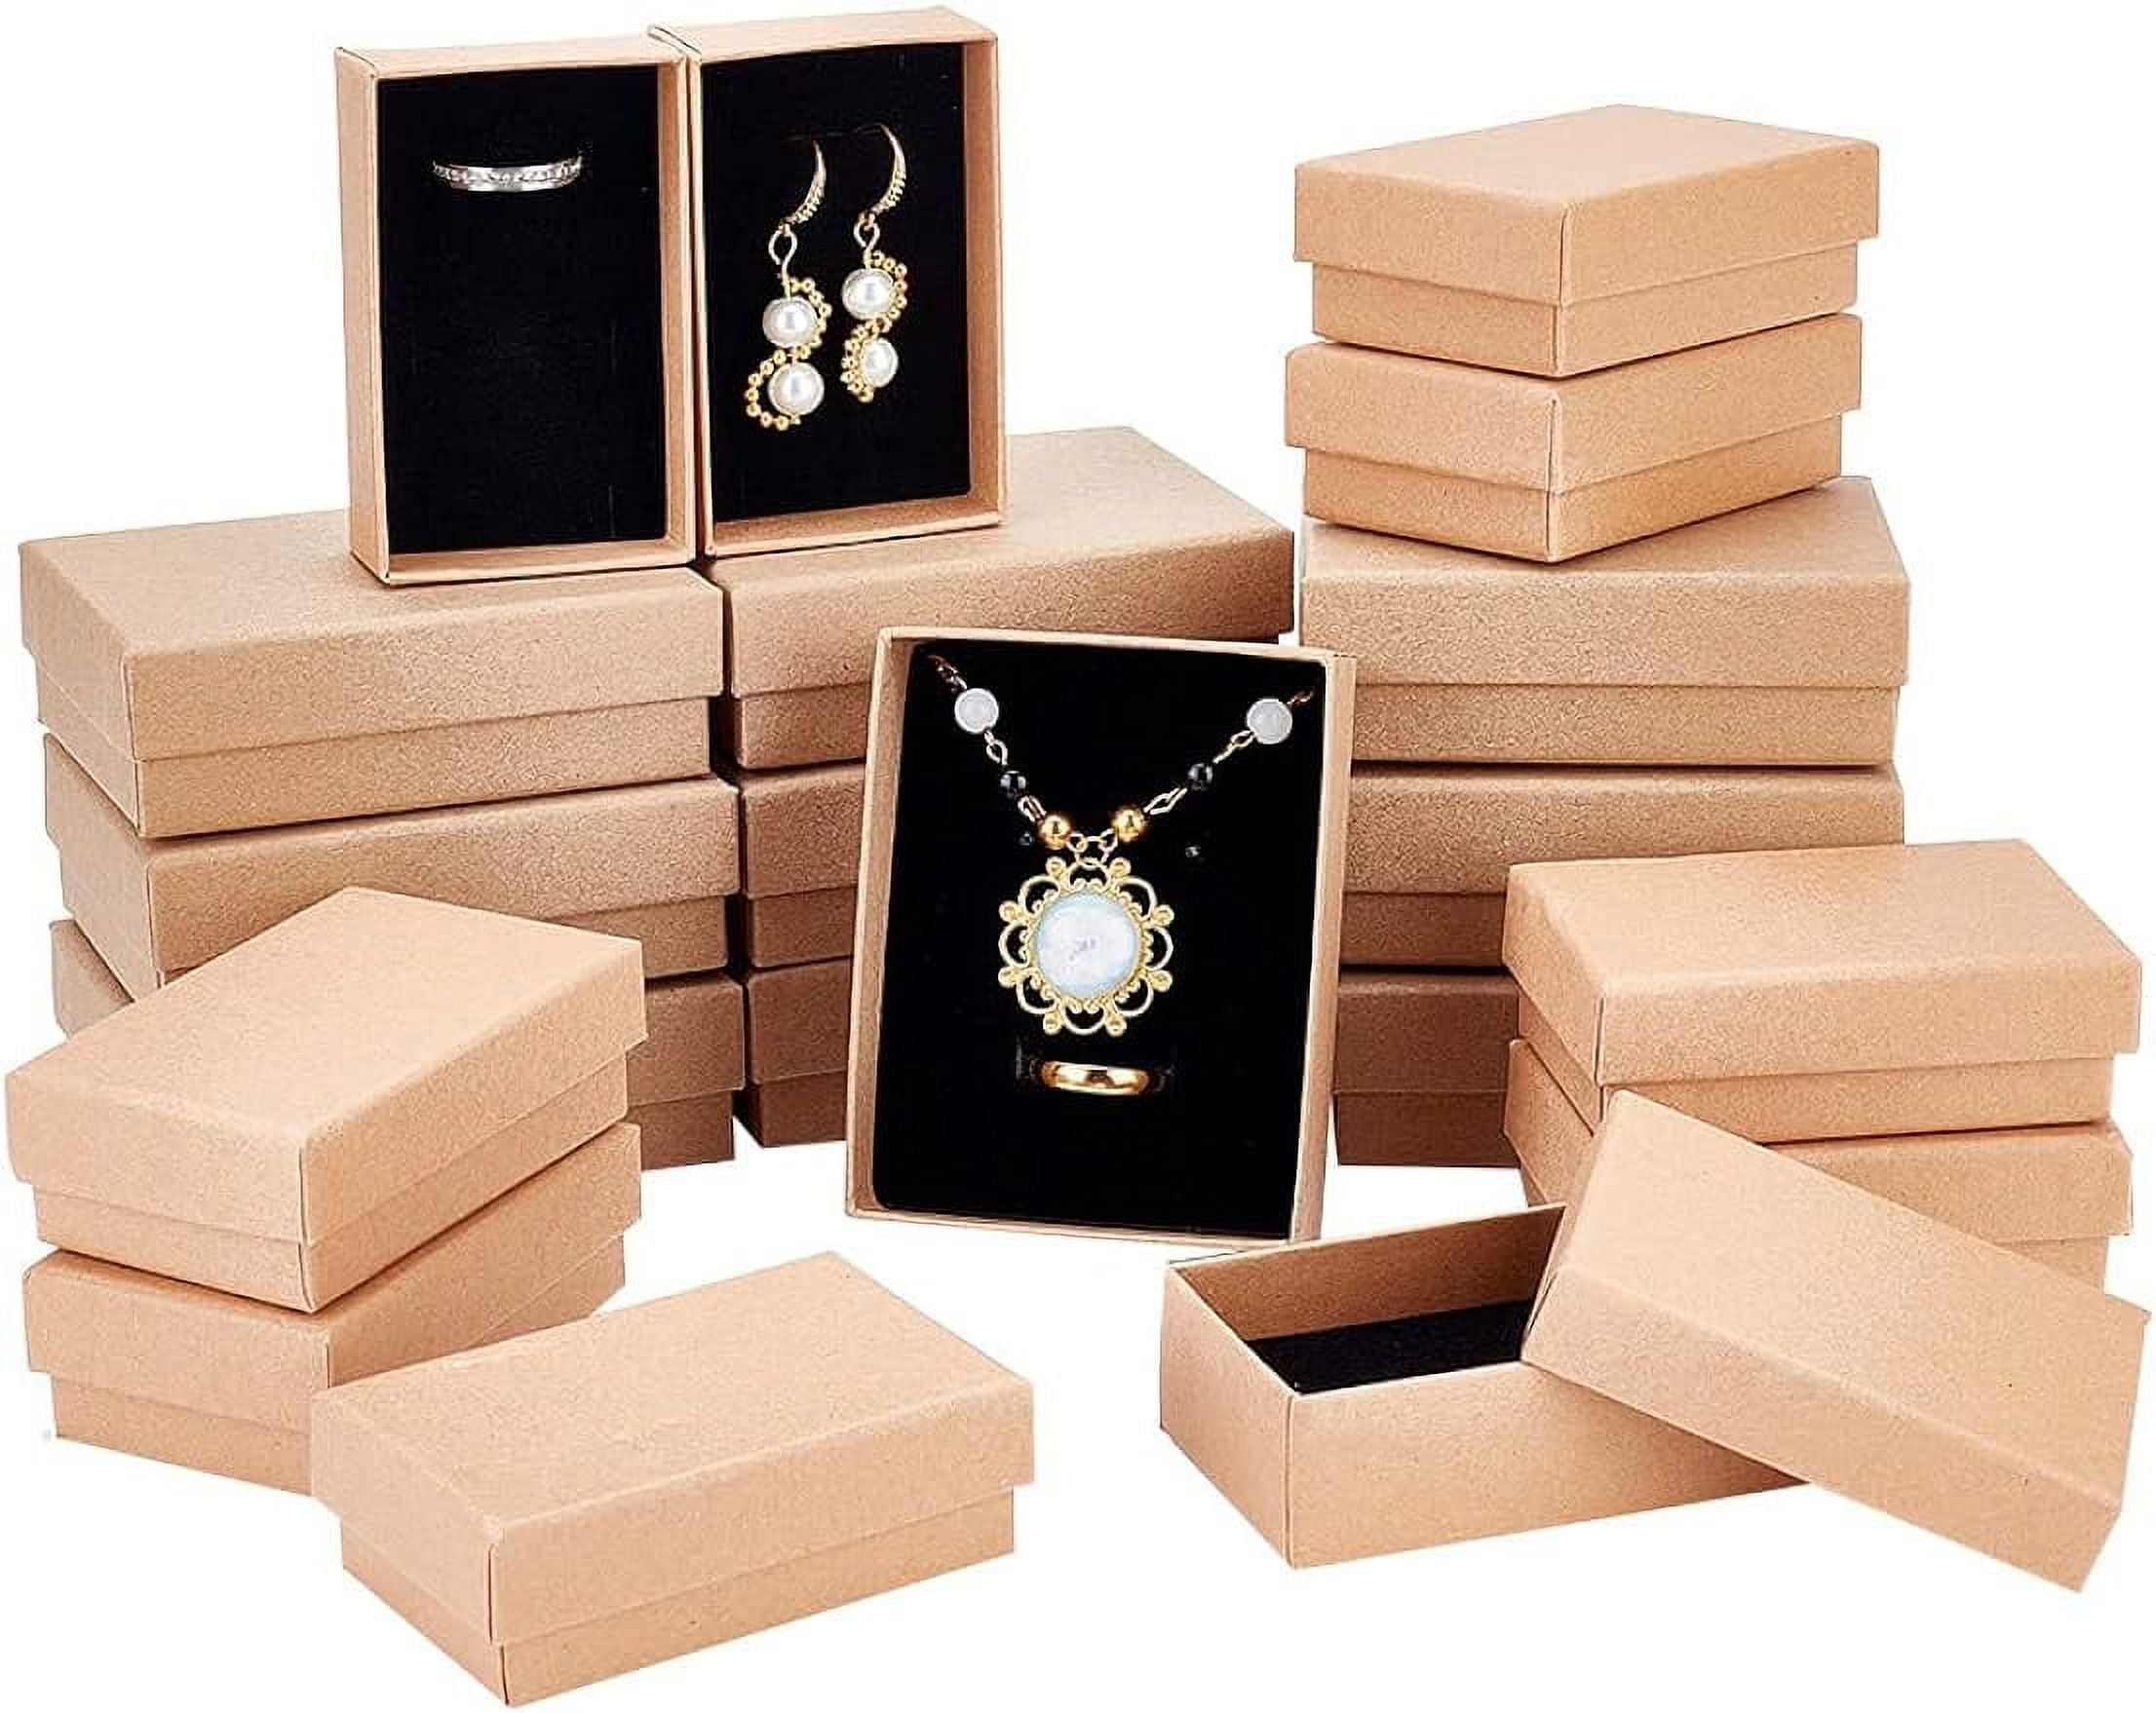 White Jewelry Boxes Wholesale | Quantity: 100 | Width: 2 5/8